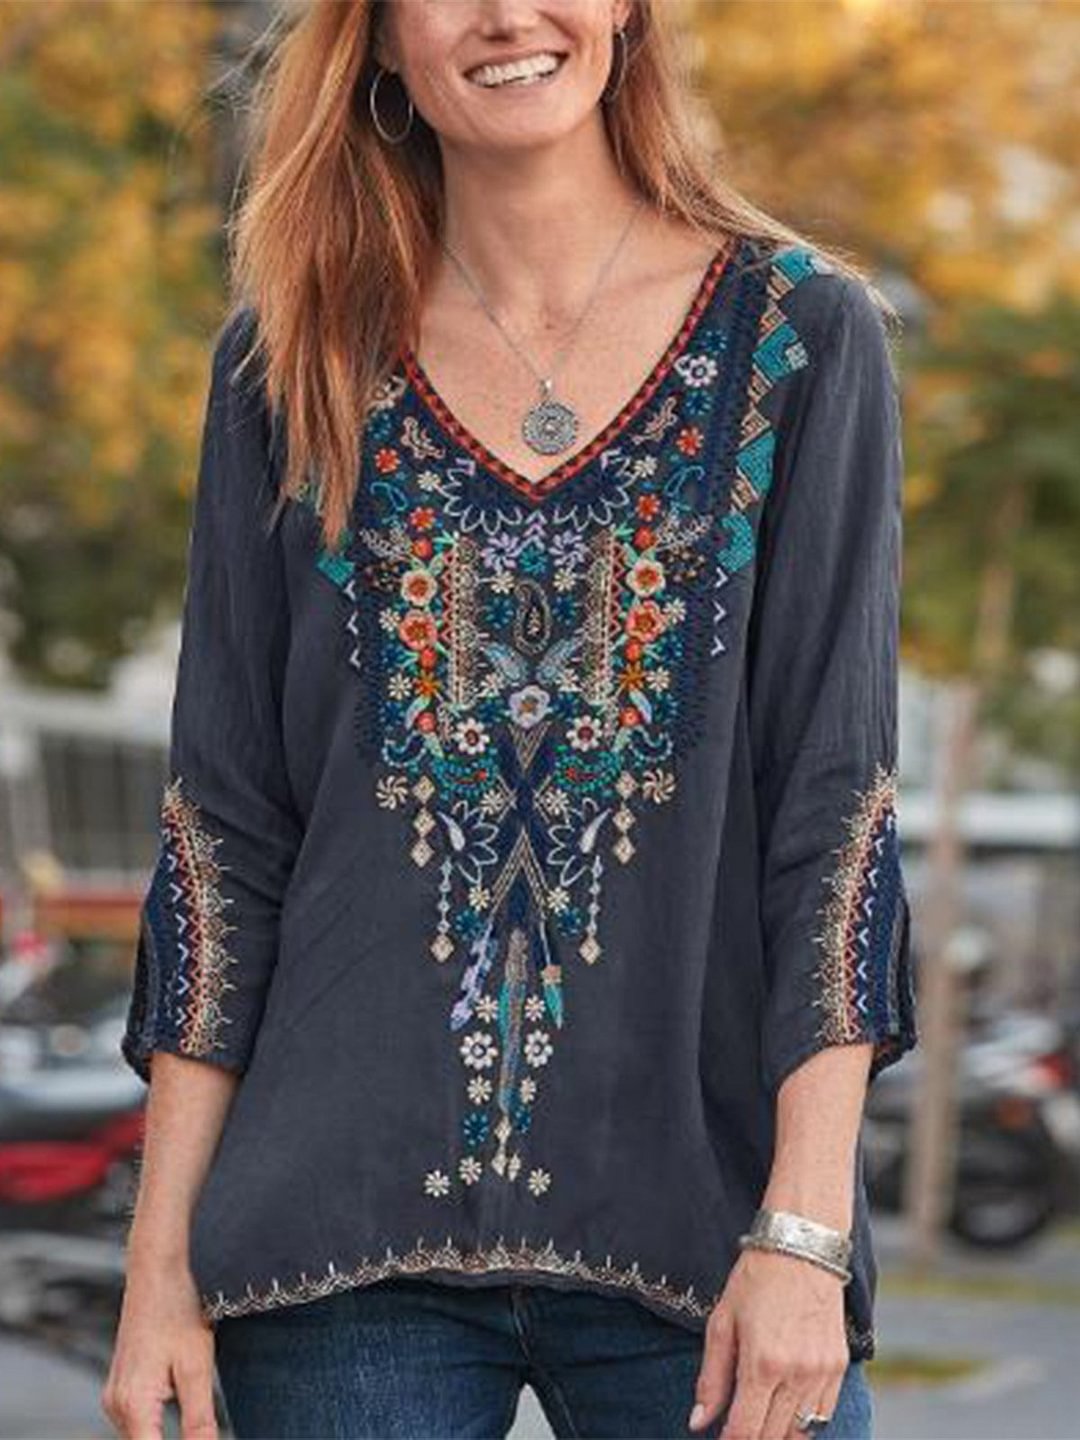 Autumn Embroidered long-sleeved lady's top